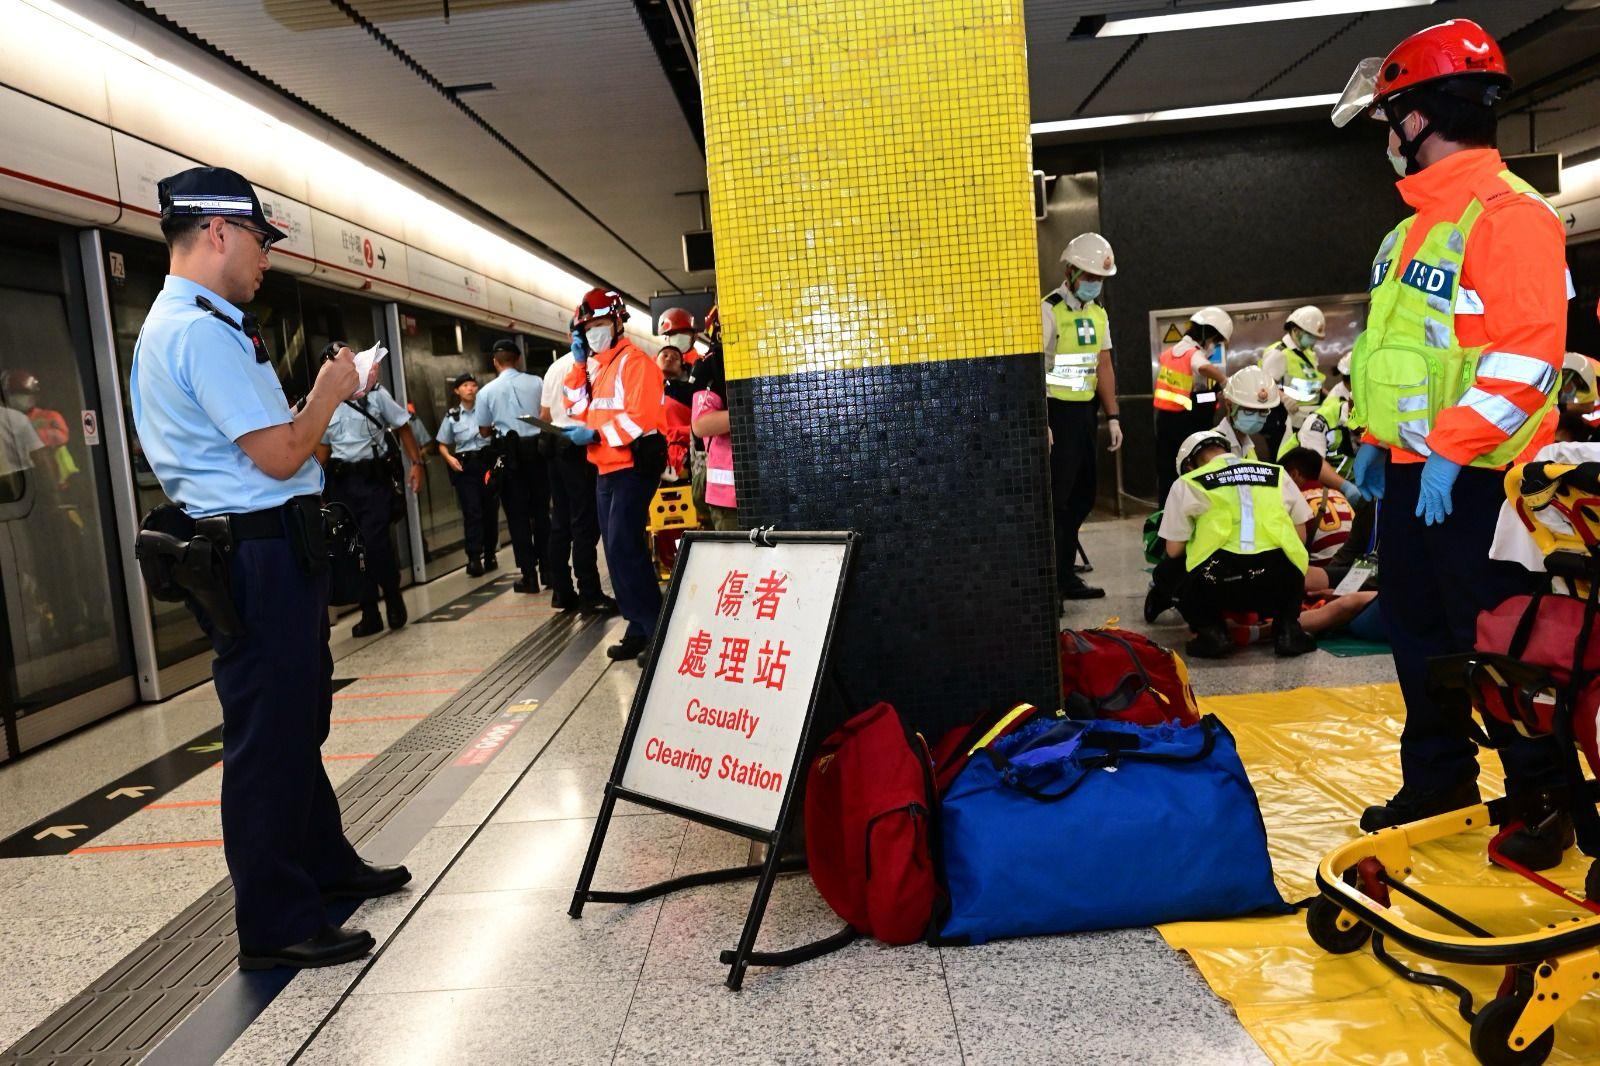 The Hong Kong Police Force (HKPF), together with the MTR Corporation (MTRC), the Fire Services Department (FSD), the Auxiliary Medical Service, St John Ambulance conducted an inter-departmental response exercise in the early hours today (October 14). Picture shows HKPF officers maintain close communication with MTRC staff and FSD officers at a platform to keep track on the latest situation of the incidents.